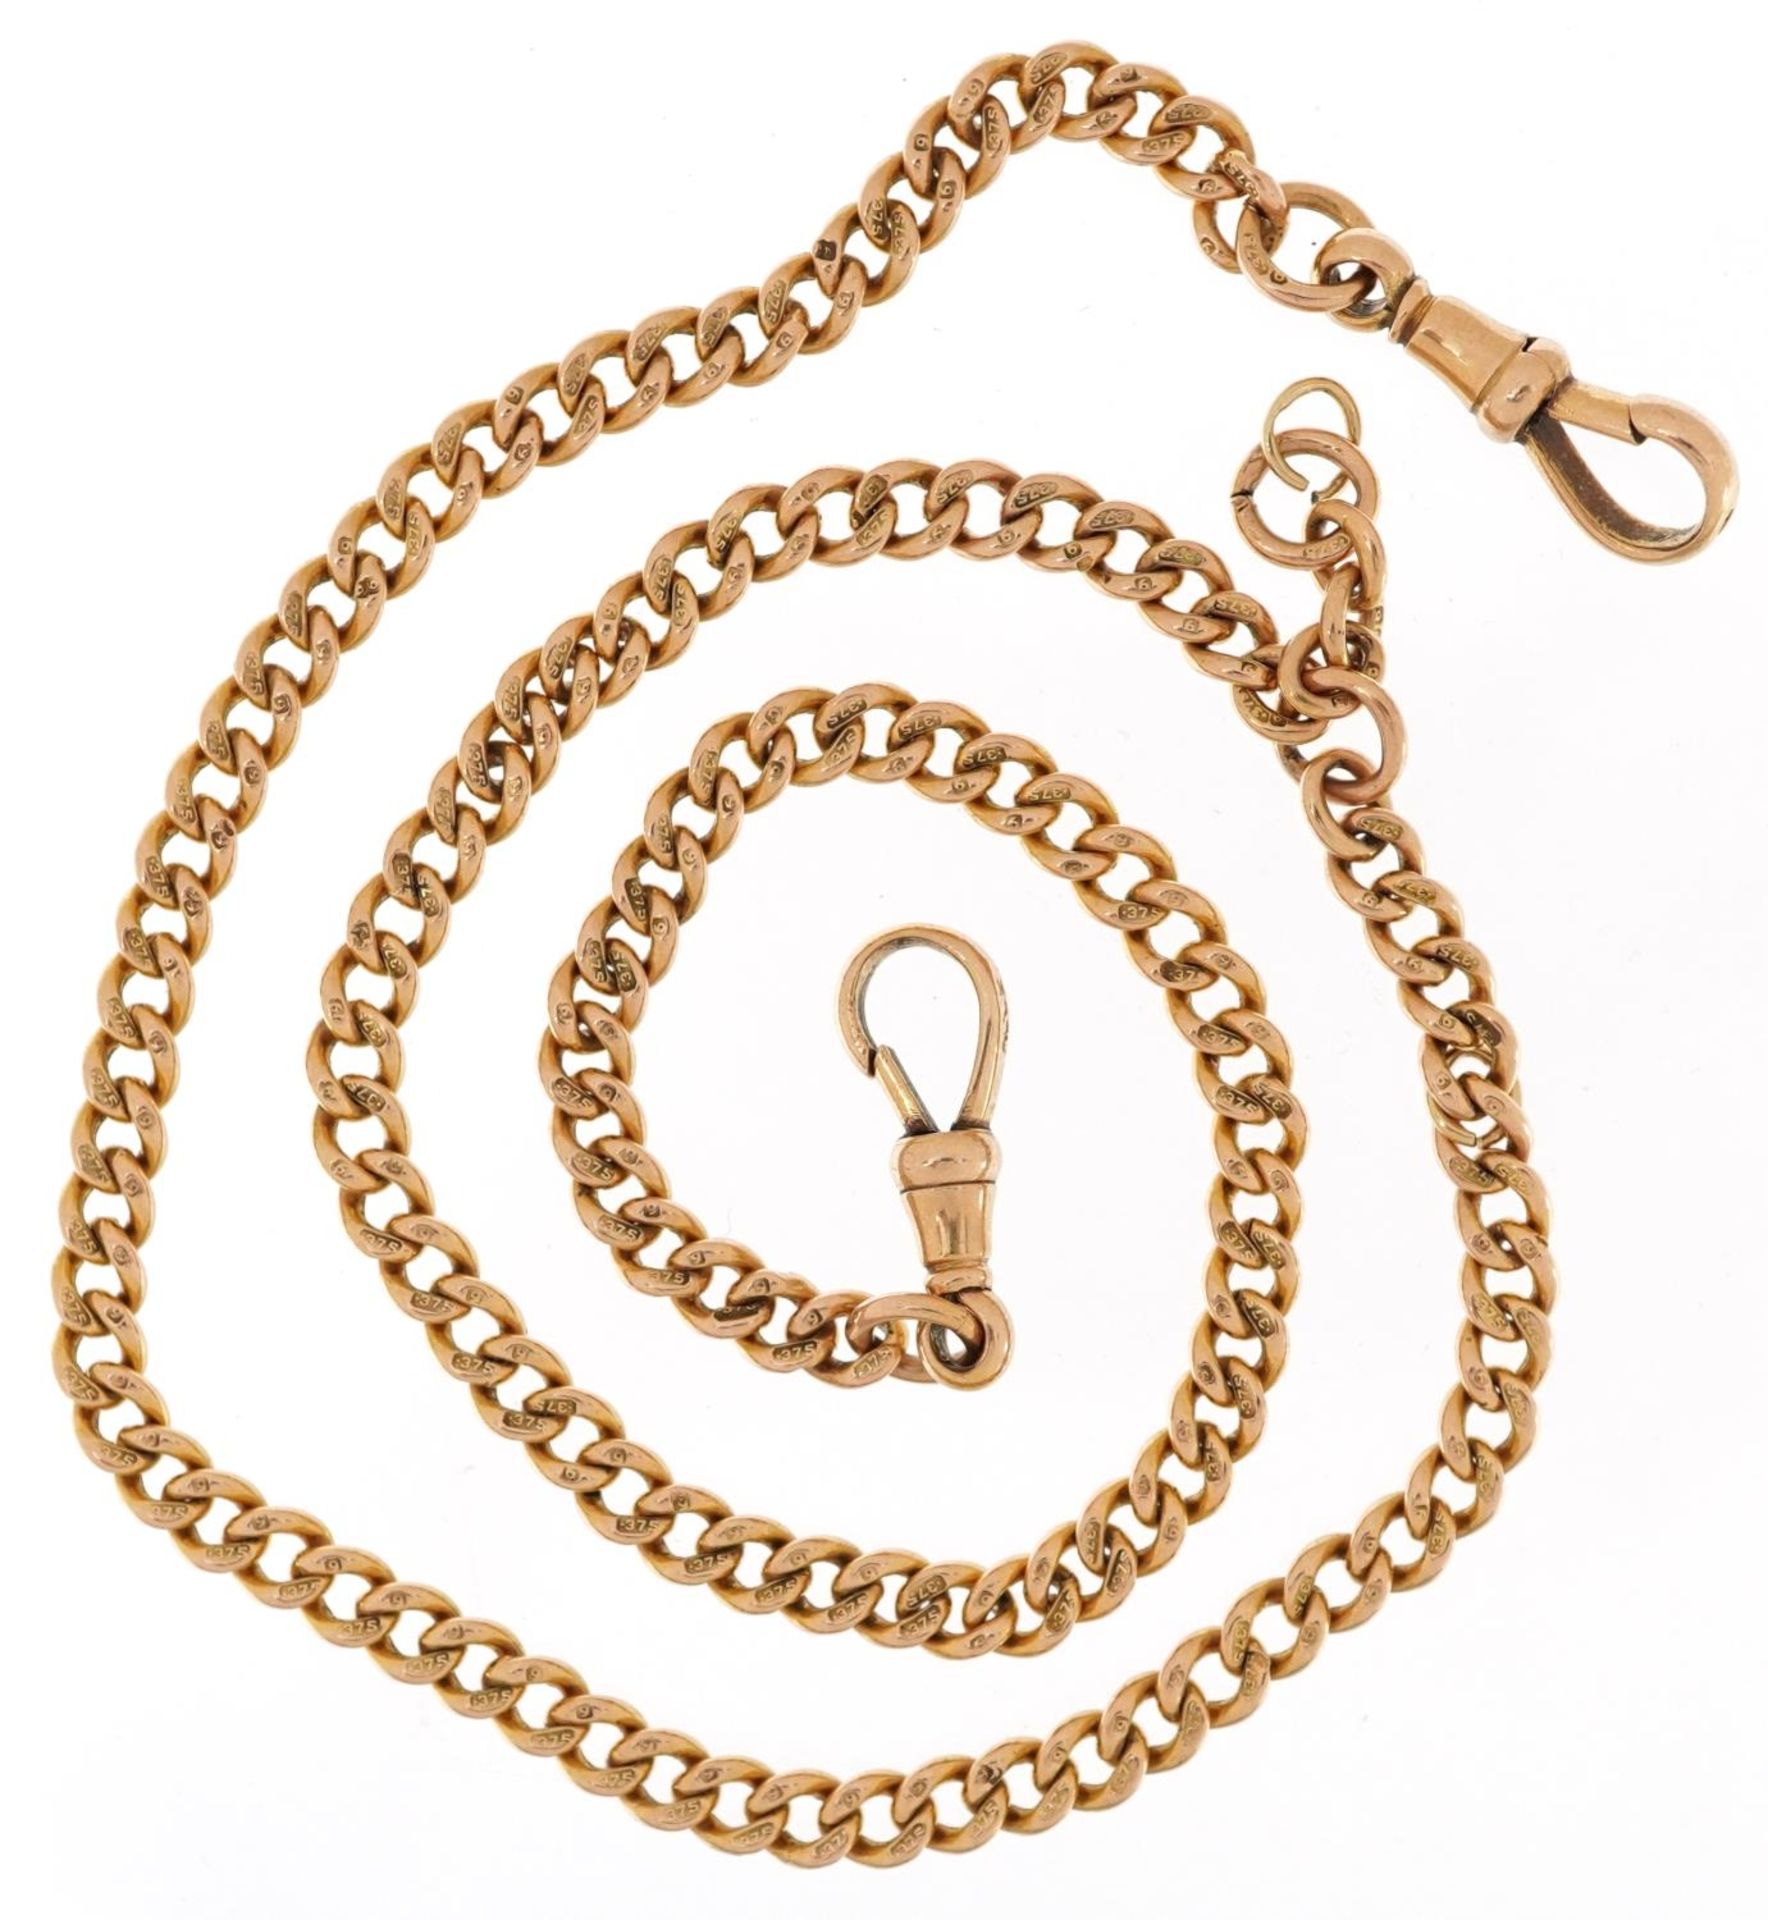 9ct gold watch chain with dog clip clasps, 43cm in length, 21.8g - Bild 2 aus 3